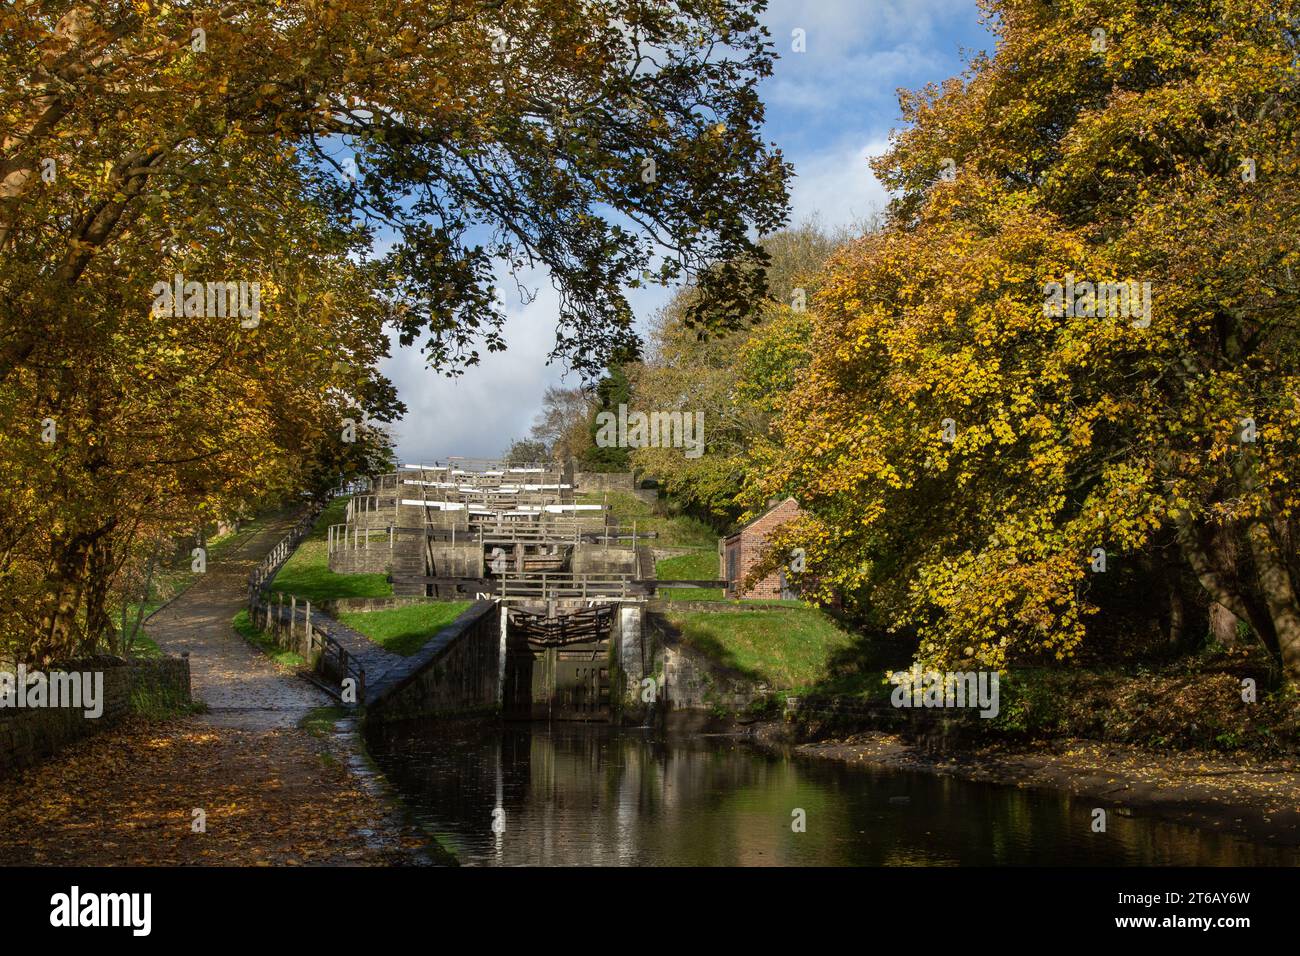 Five Rise Locks on the Leeds Liverpool Canal in Bingley, Yorkshire, in the Autumn. The locks are the steepest staircase locks in the country. Stock Photo